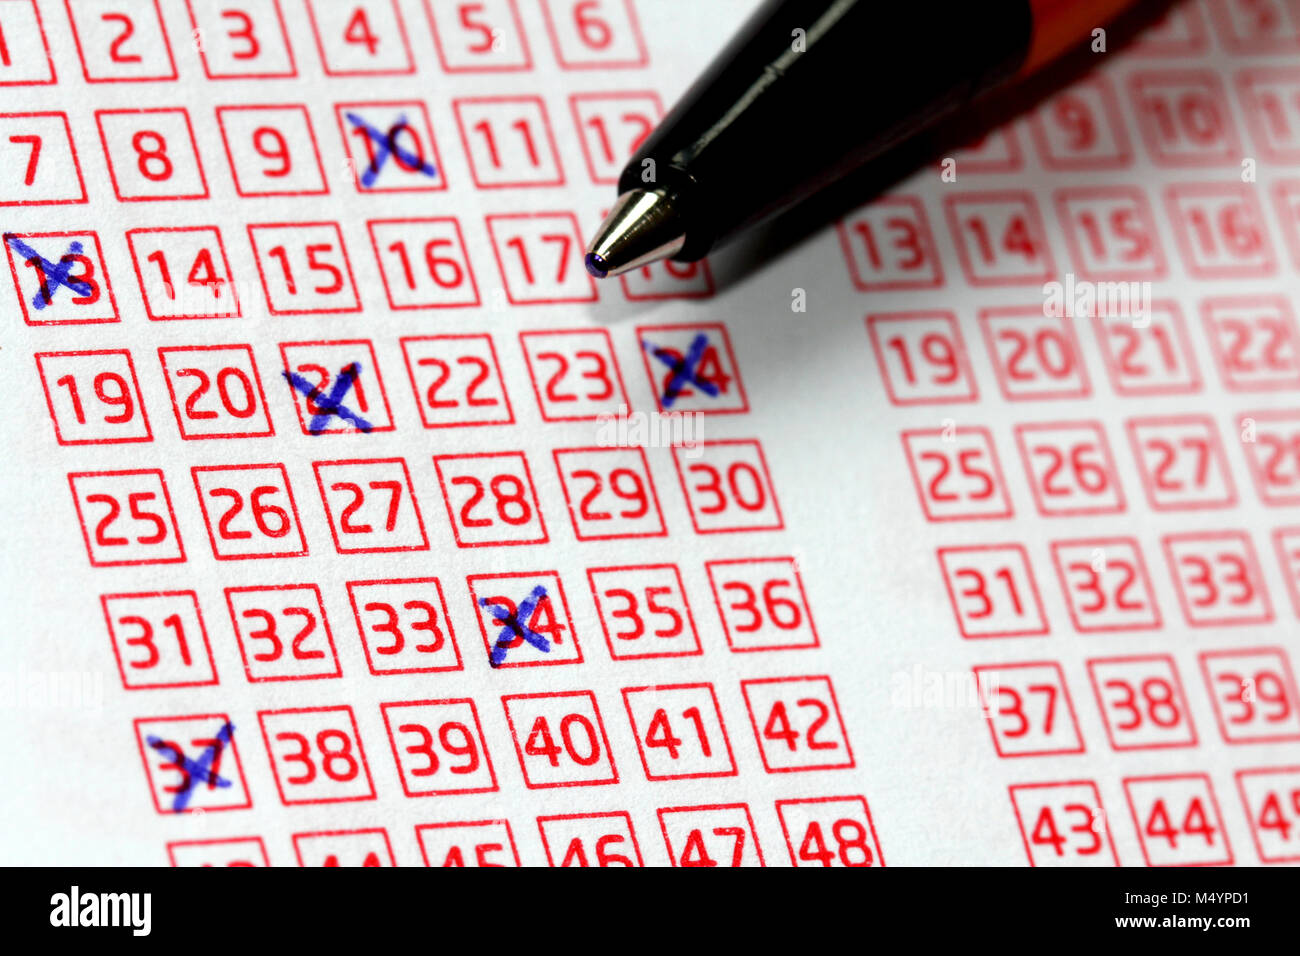 Pen and lucky numbers marked on a lottery coupon, shallow depth of field. Stock Photo